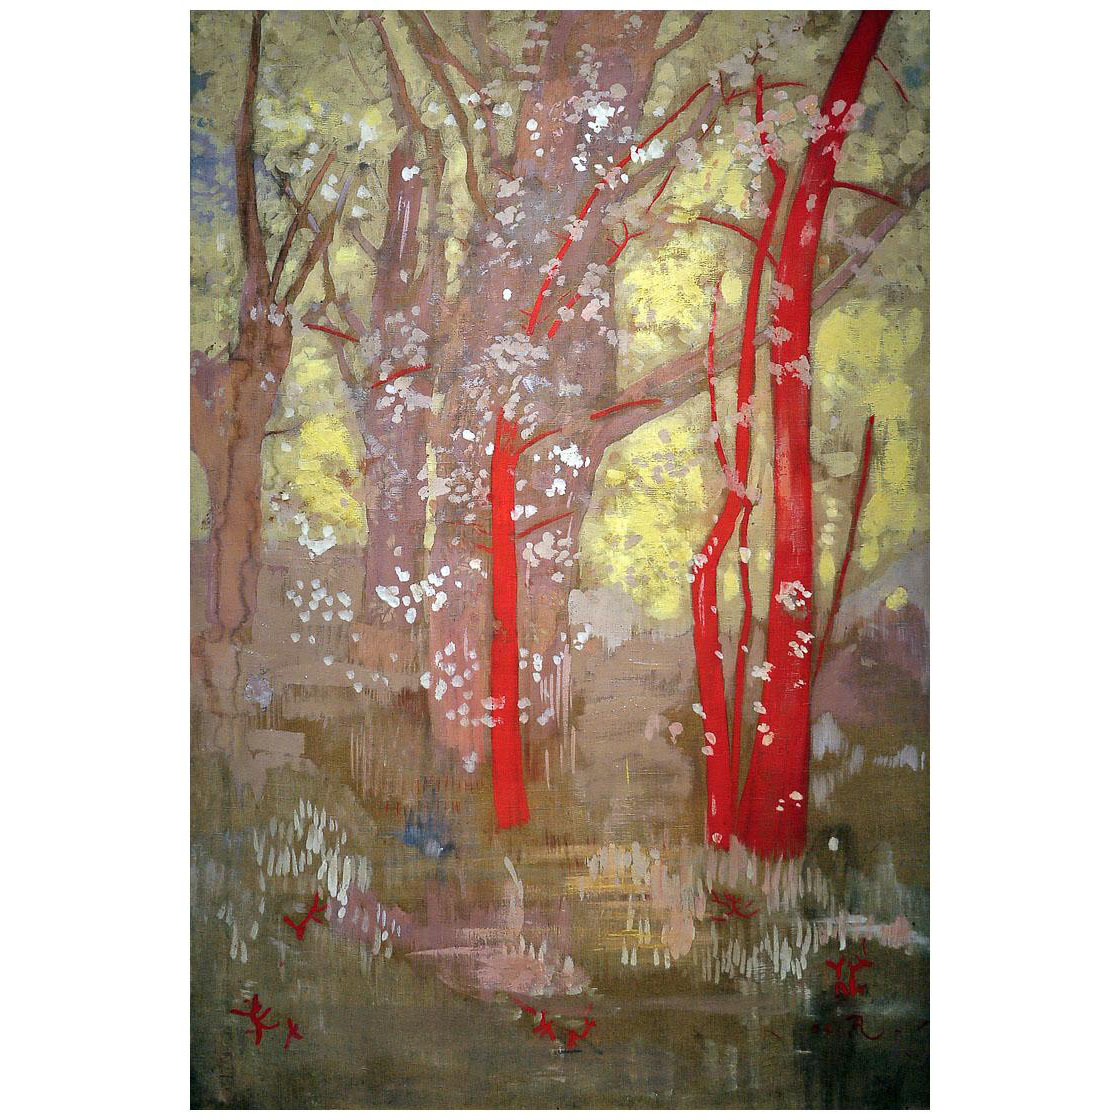 Odilon Redon. Arbres rouges. 1905-1906. Private collection